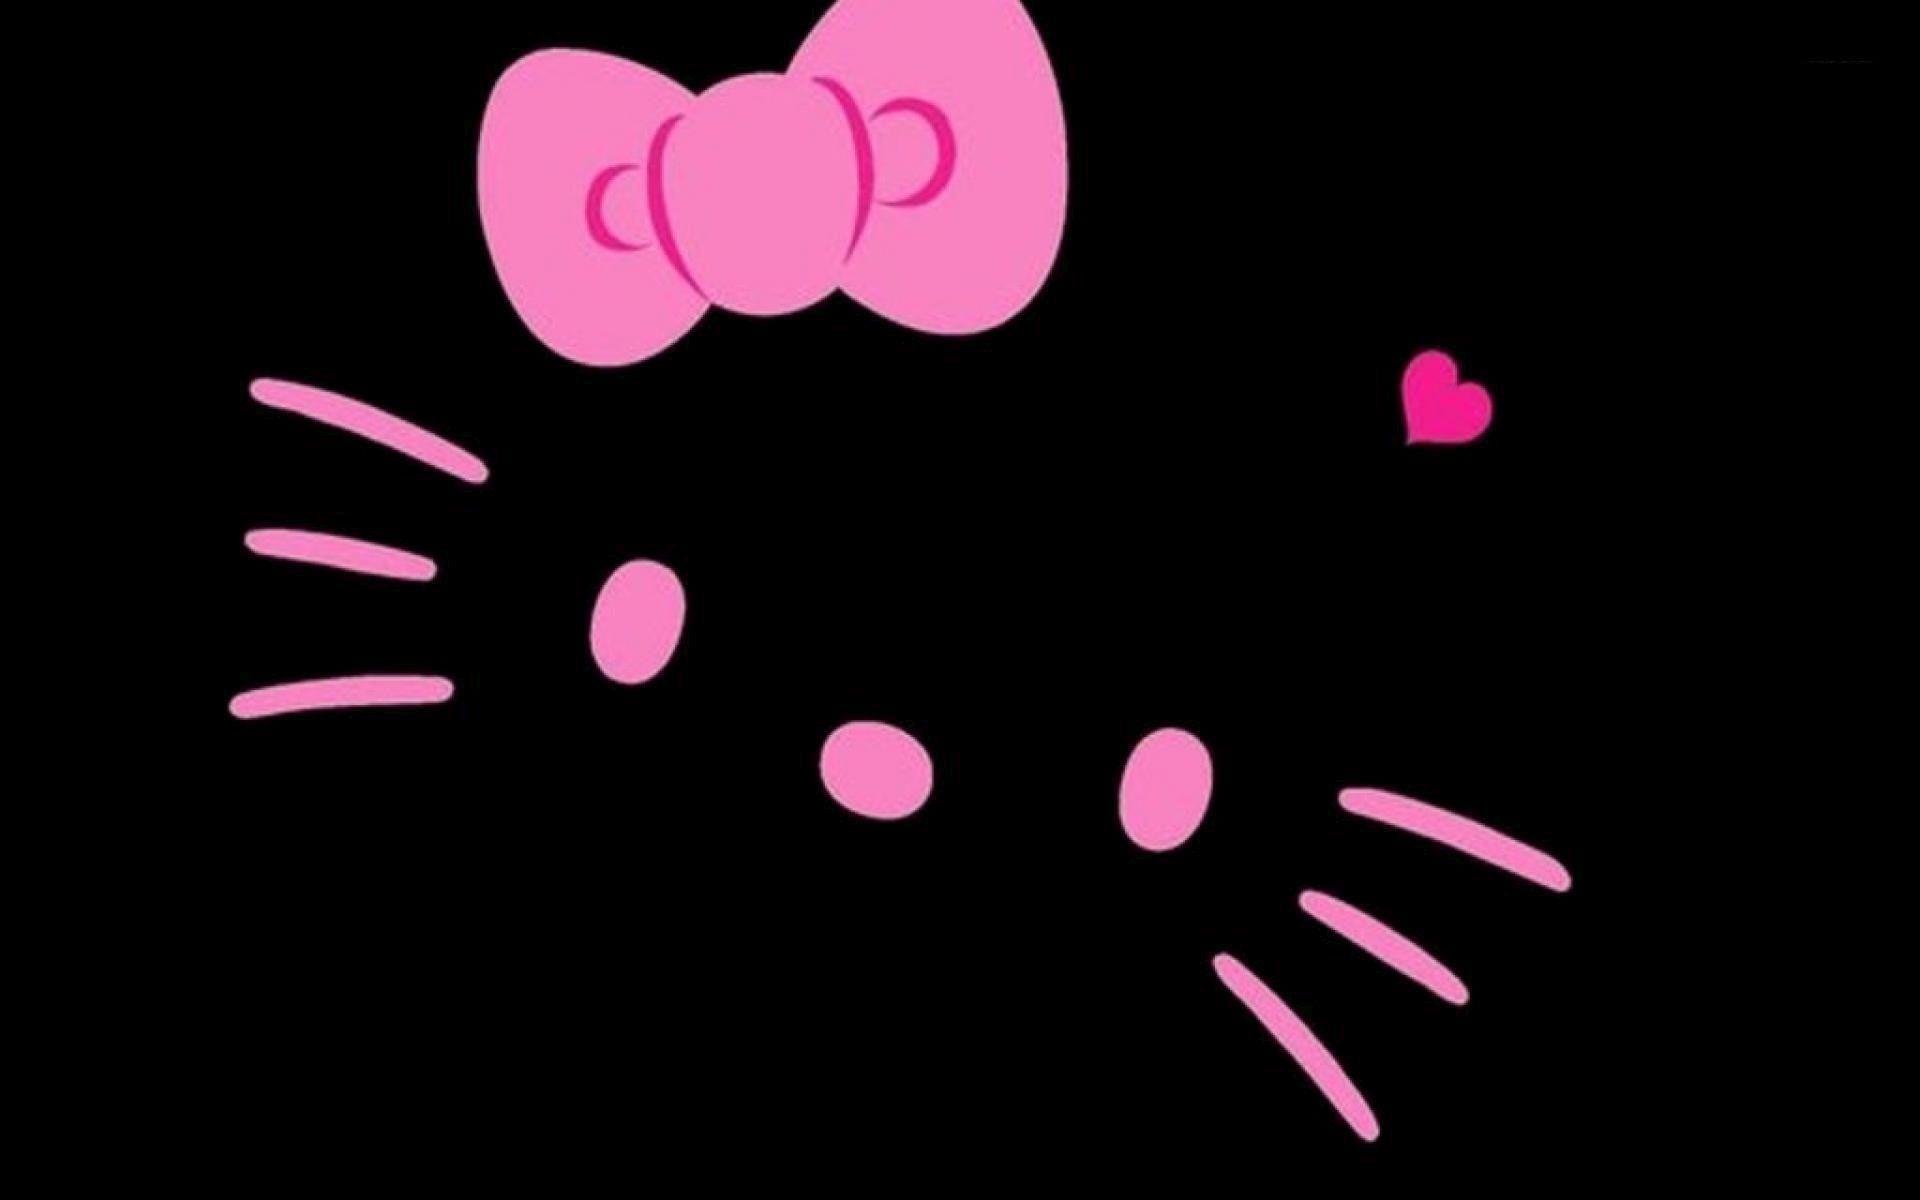 Gallery For Gt Pink And Black Hello Kitty Wallpaper